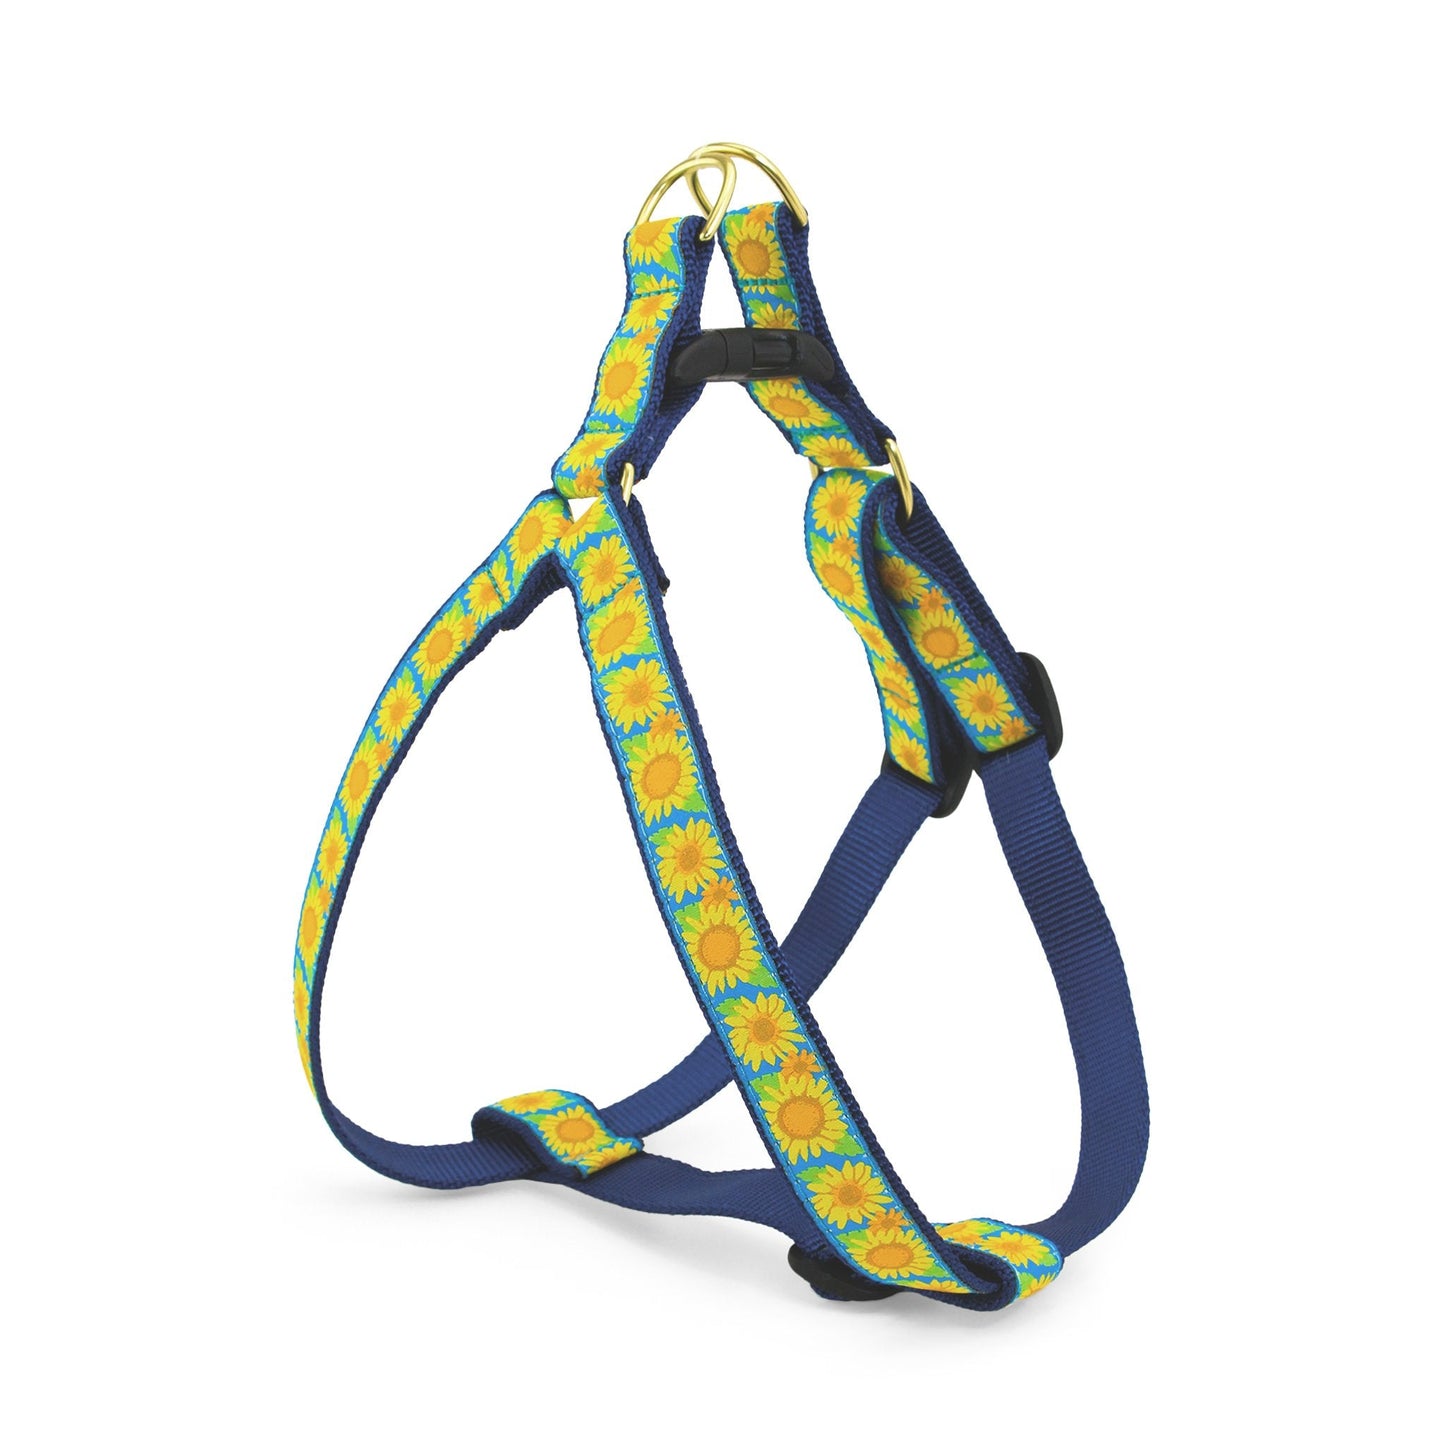 Bright Sunflower Dog Harness by Up Country